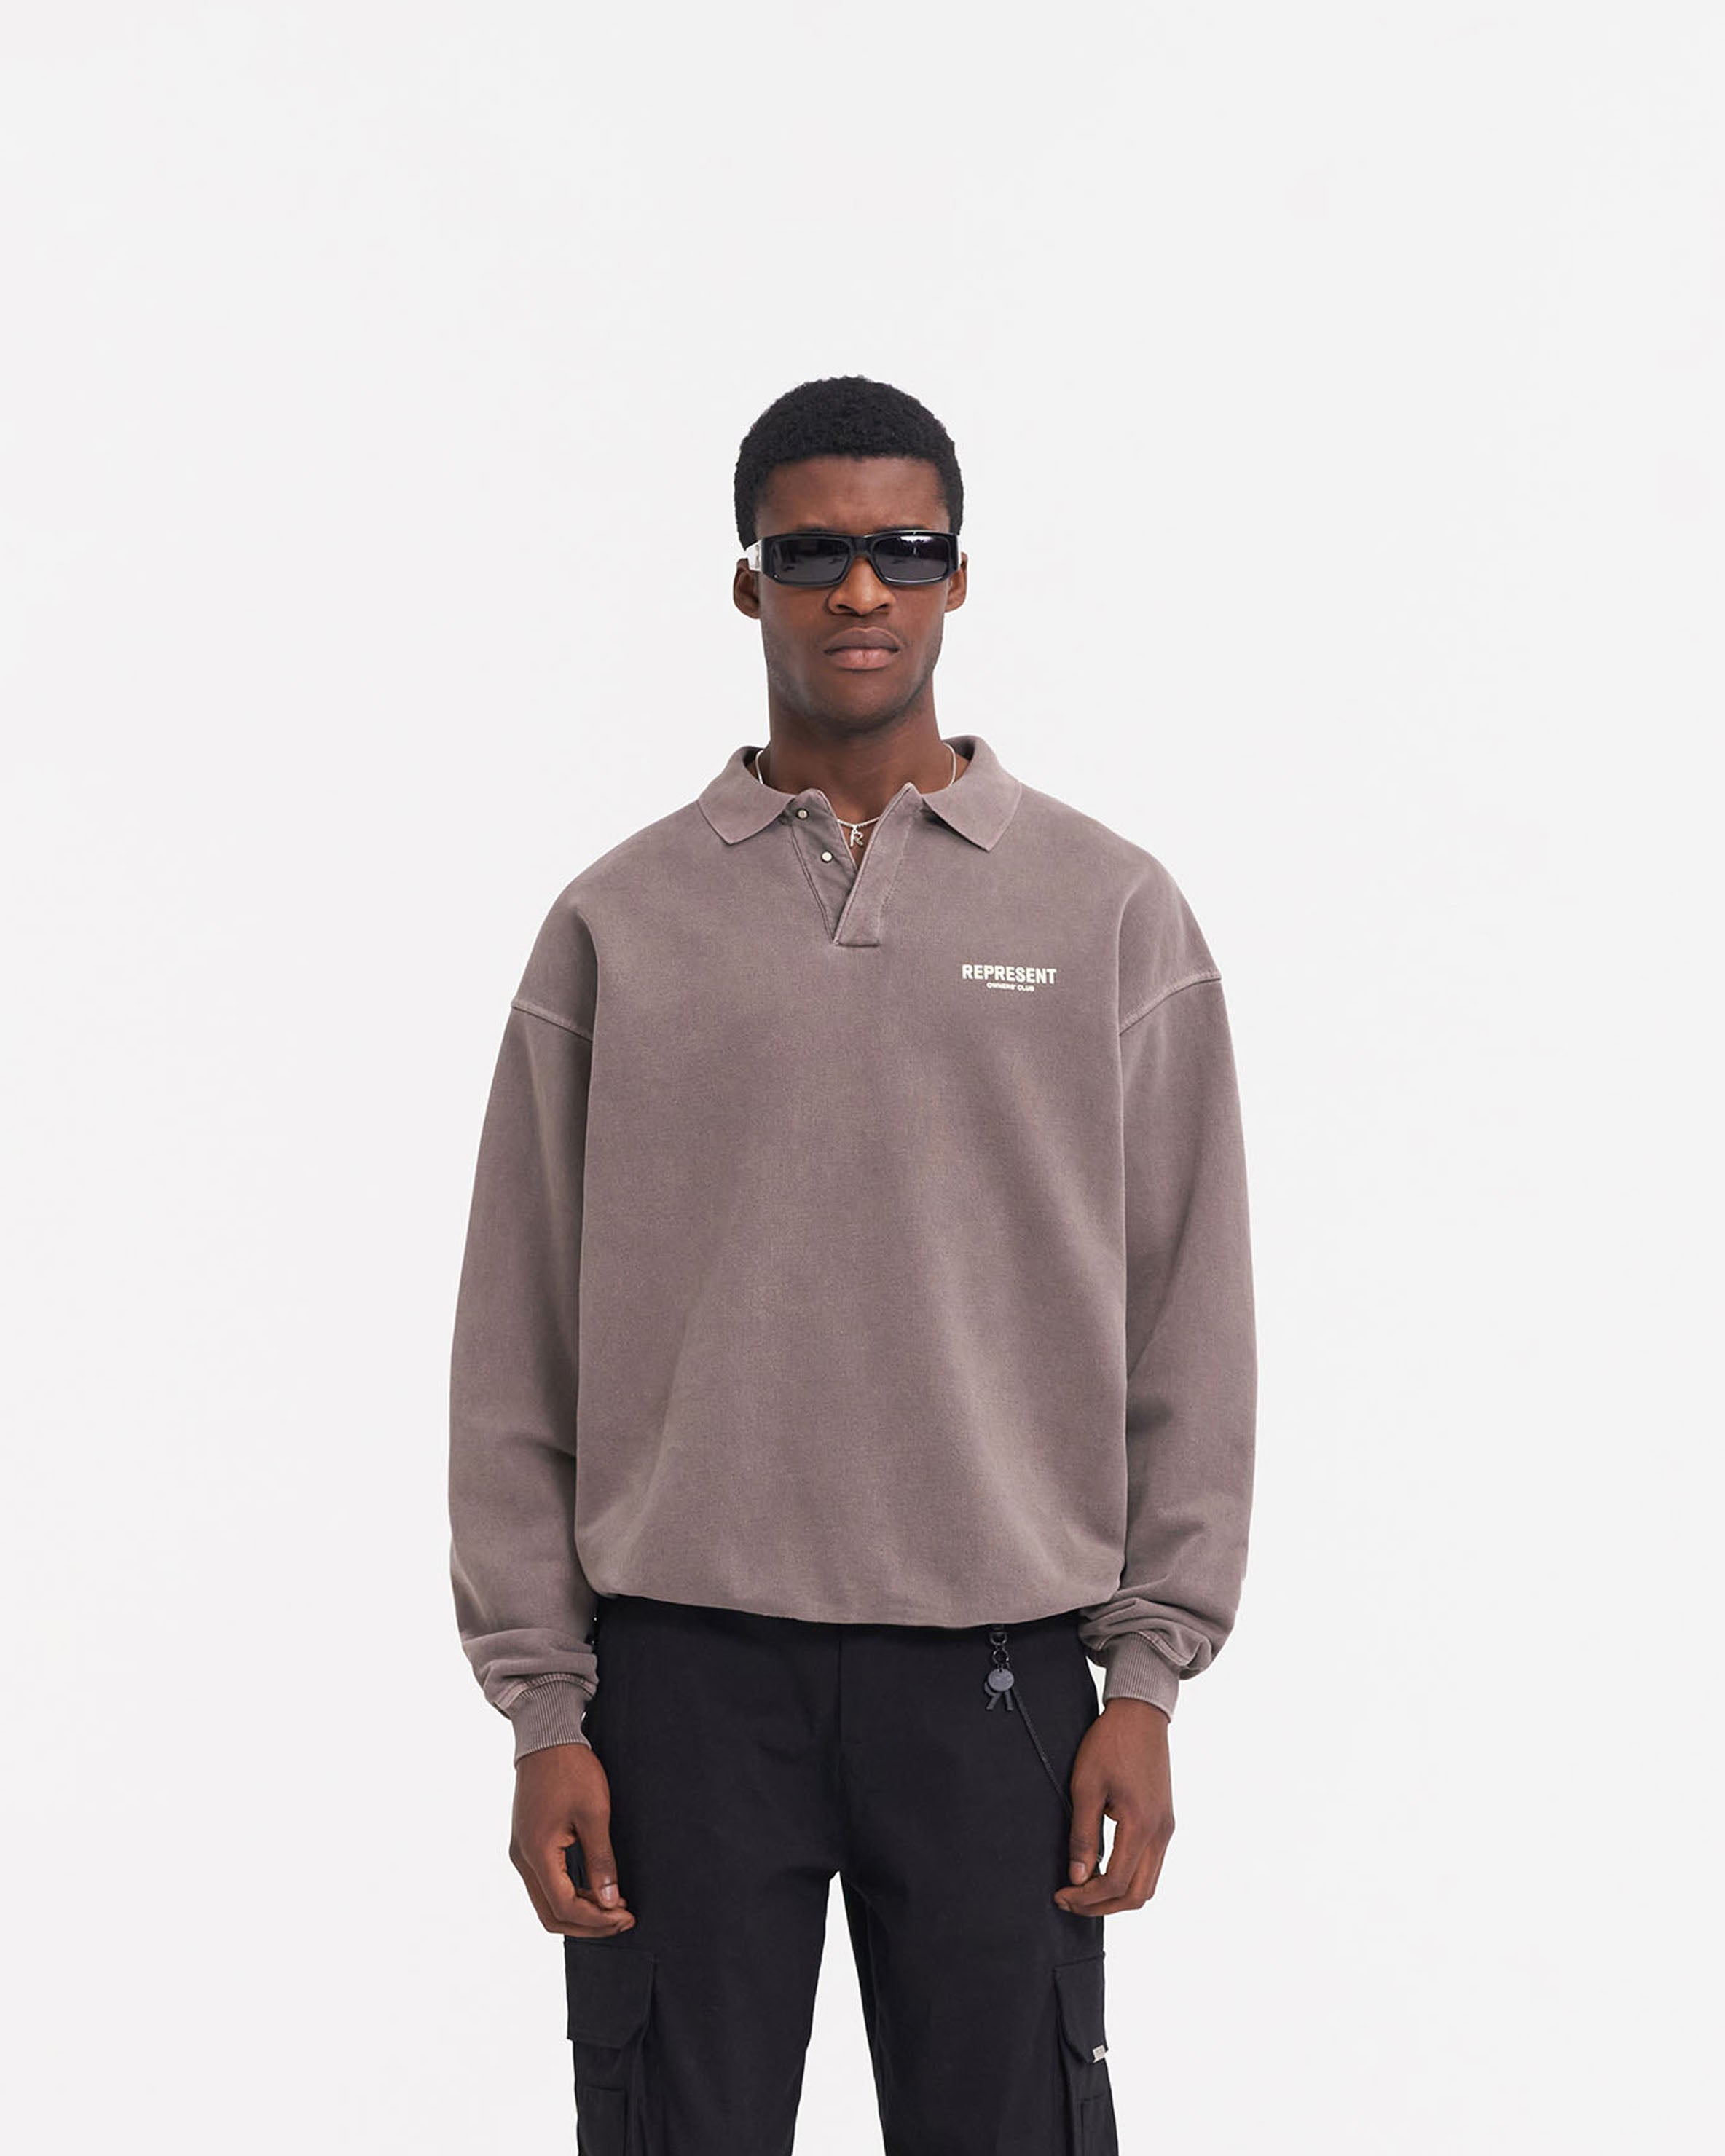 Represent Owners Club Long Sleeve Polo Sweater - Fog